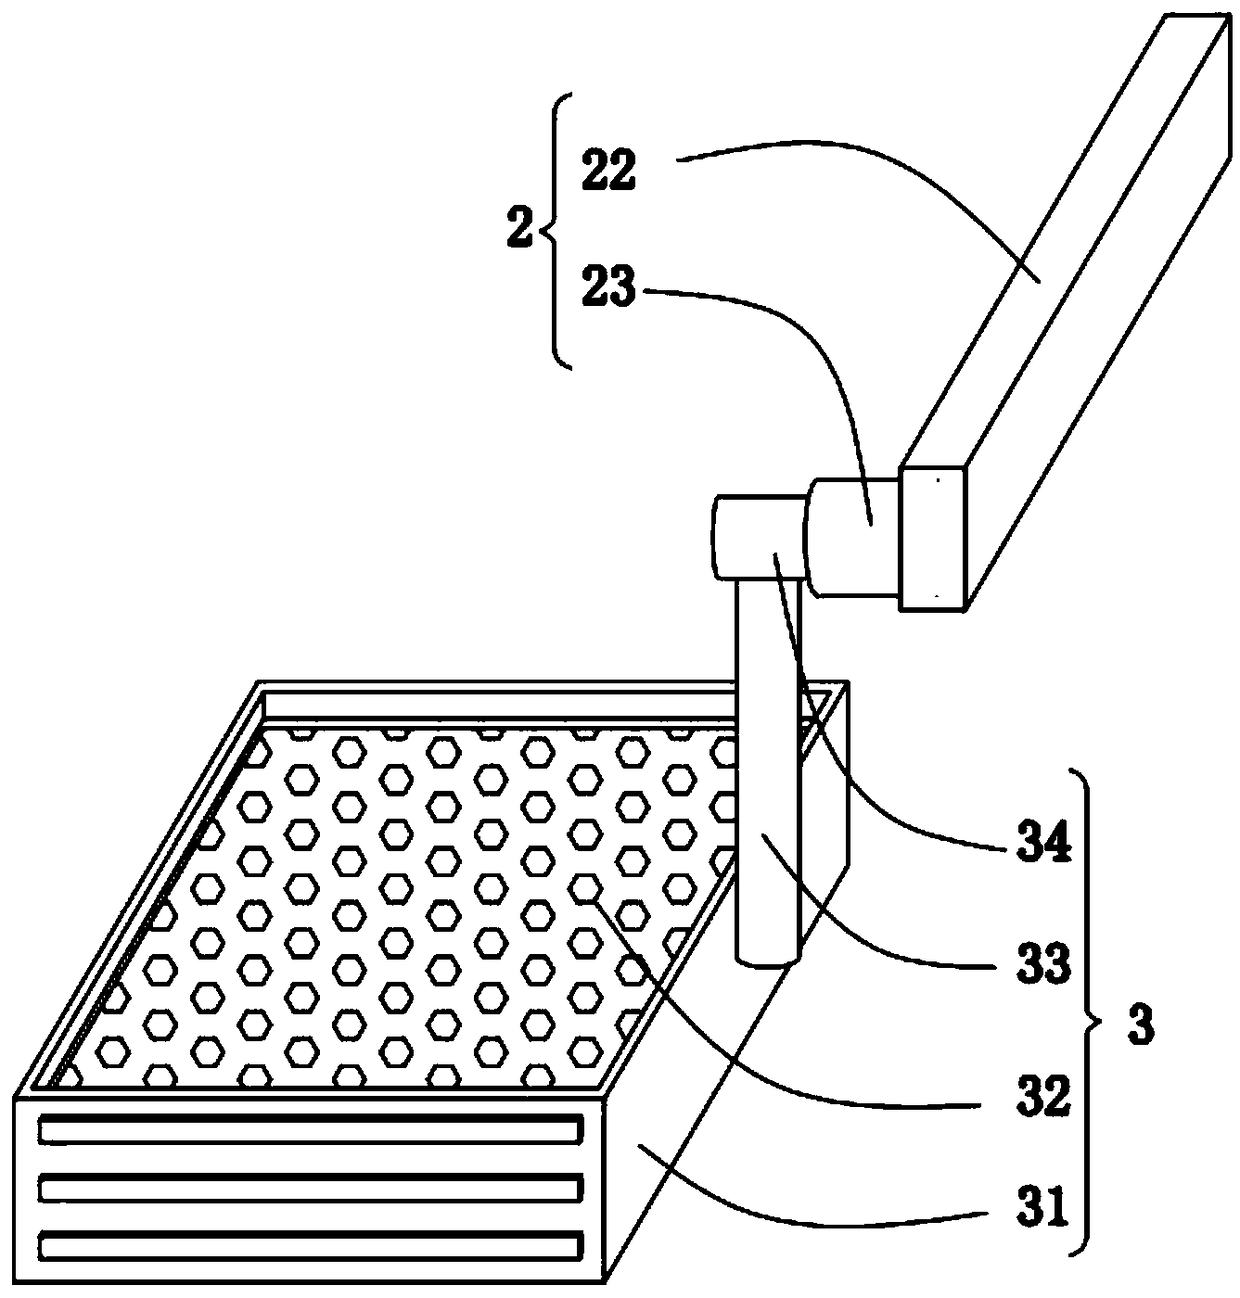 Medical device disinfection device